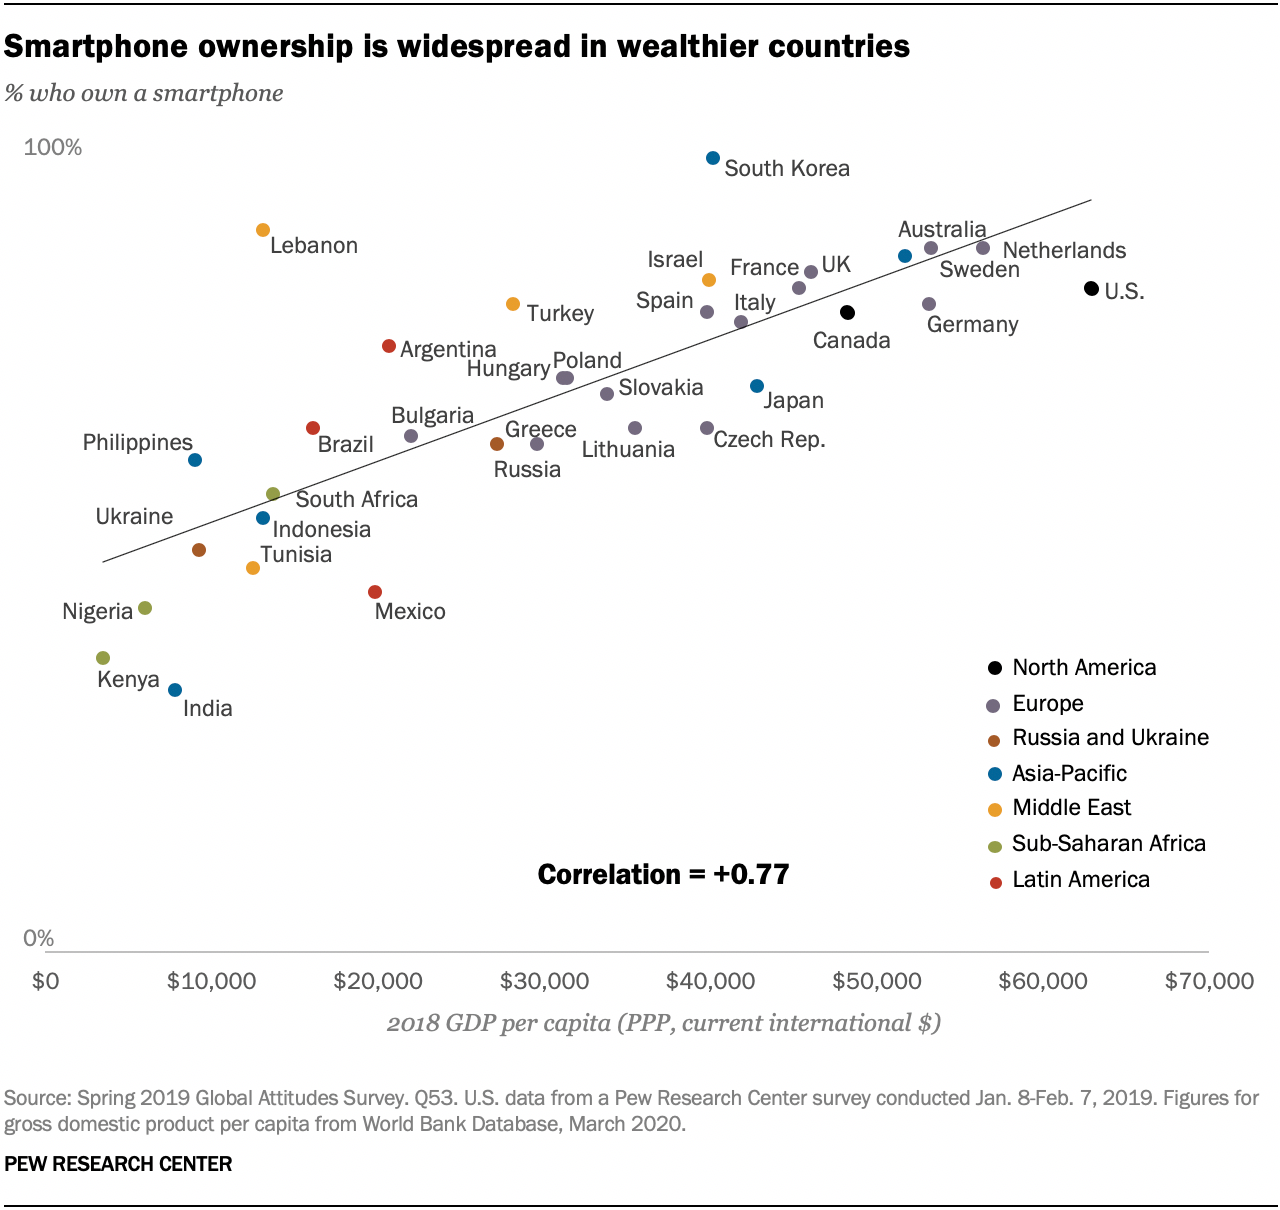 Smartphone ownership is widespread in wealthier countries